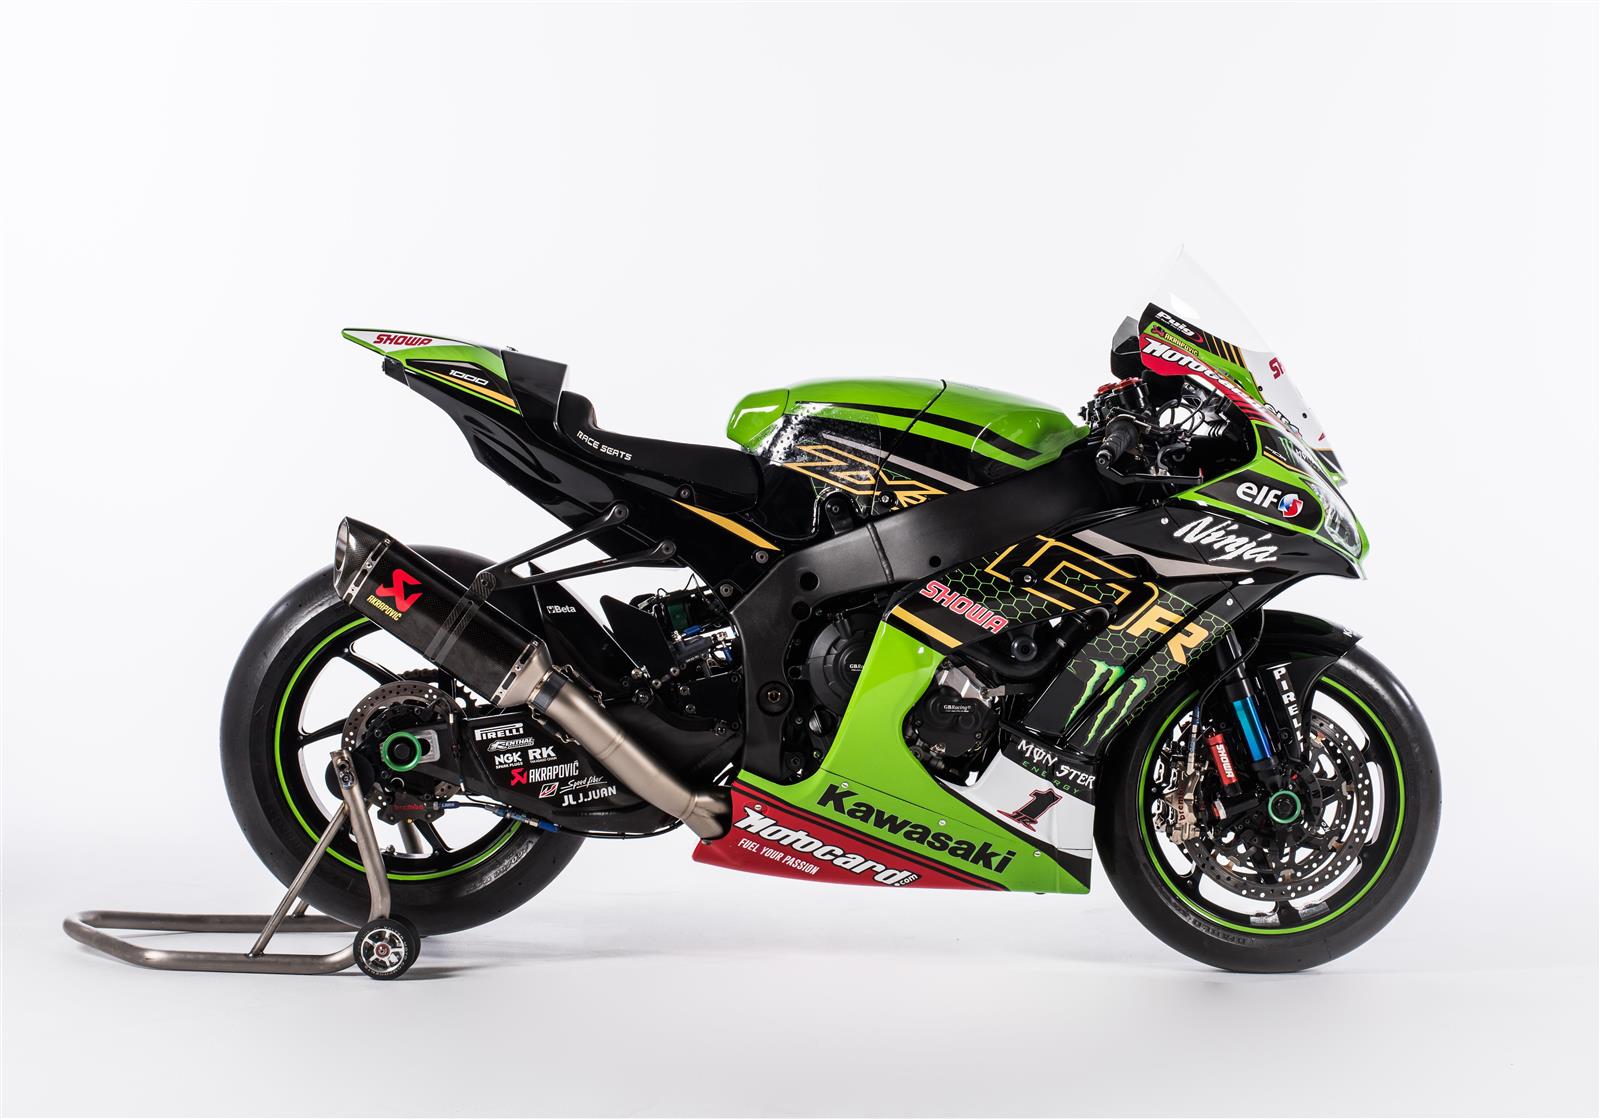 Newsletter The Official Race Report Service Of Kawasaki Racing Team Newsletter Kawasaki Fill In The Following Fields To Subscribe To Kawasaki Newsletter By Submitting Your Data You Agree With The Kawasaki S Privacy Policy And Confirm You Have Read And